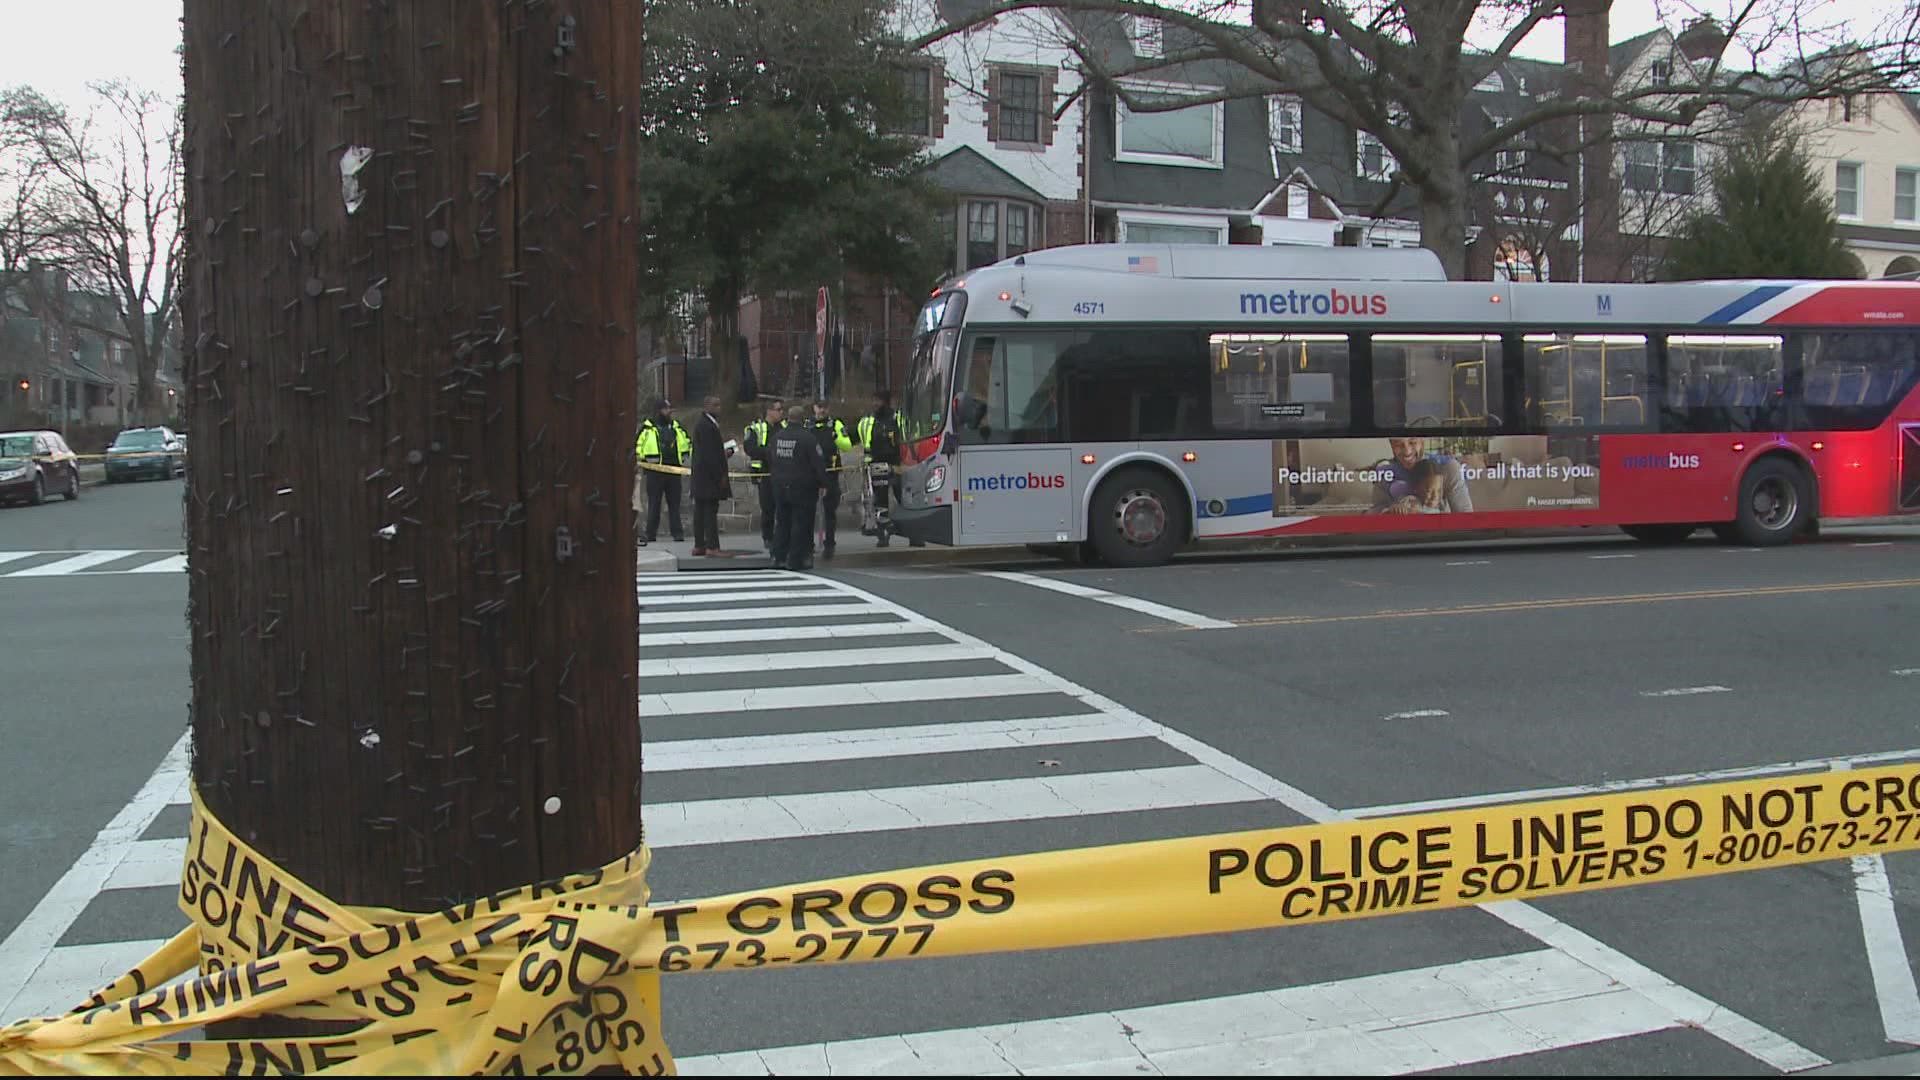 DC Police say the children were shot as they were getting off the Metrobus Wednesday evening.